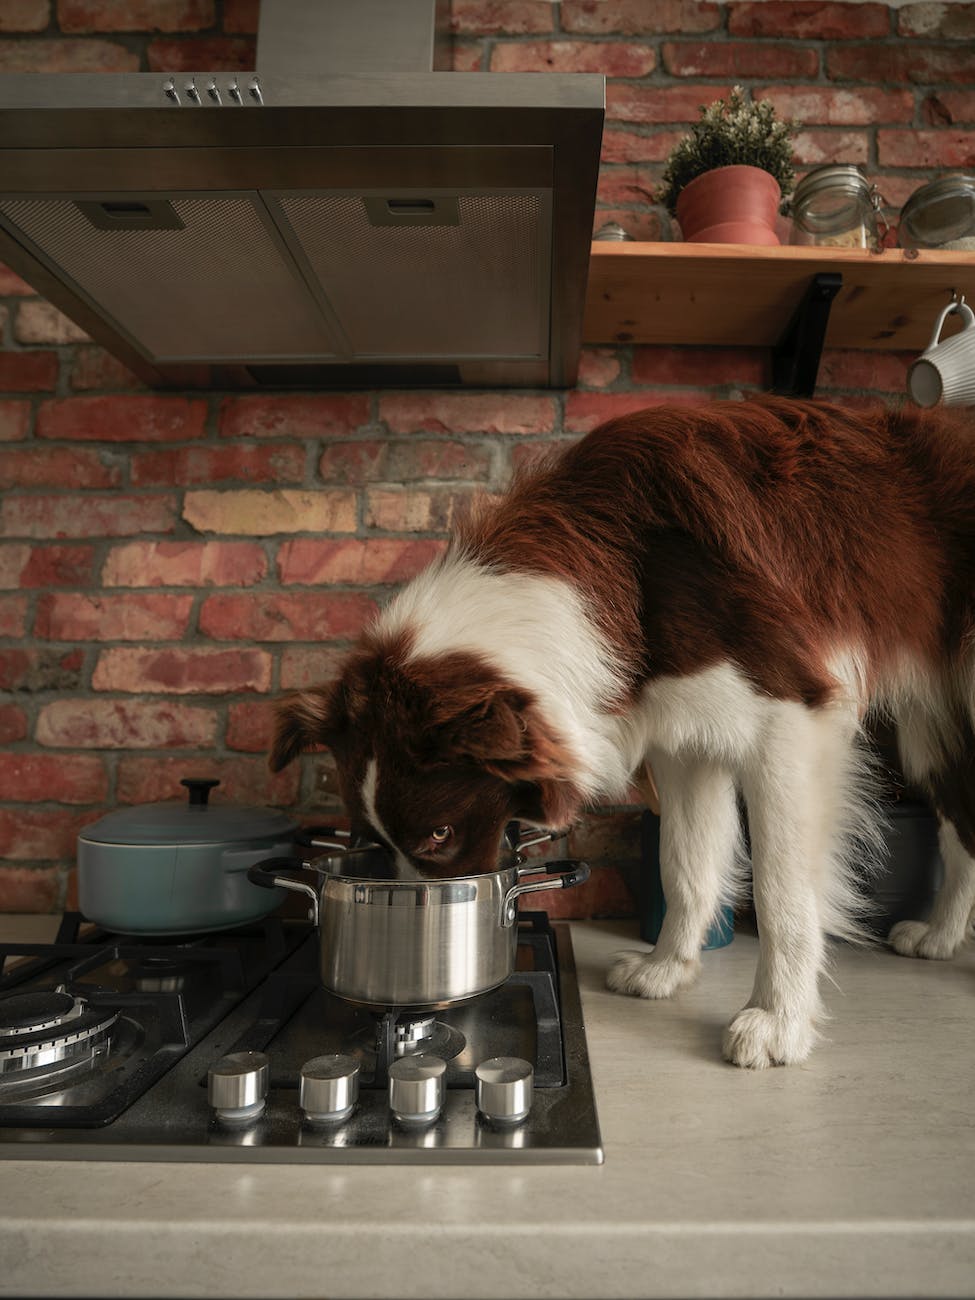 a brown and white dog eating on a cooking pot